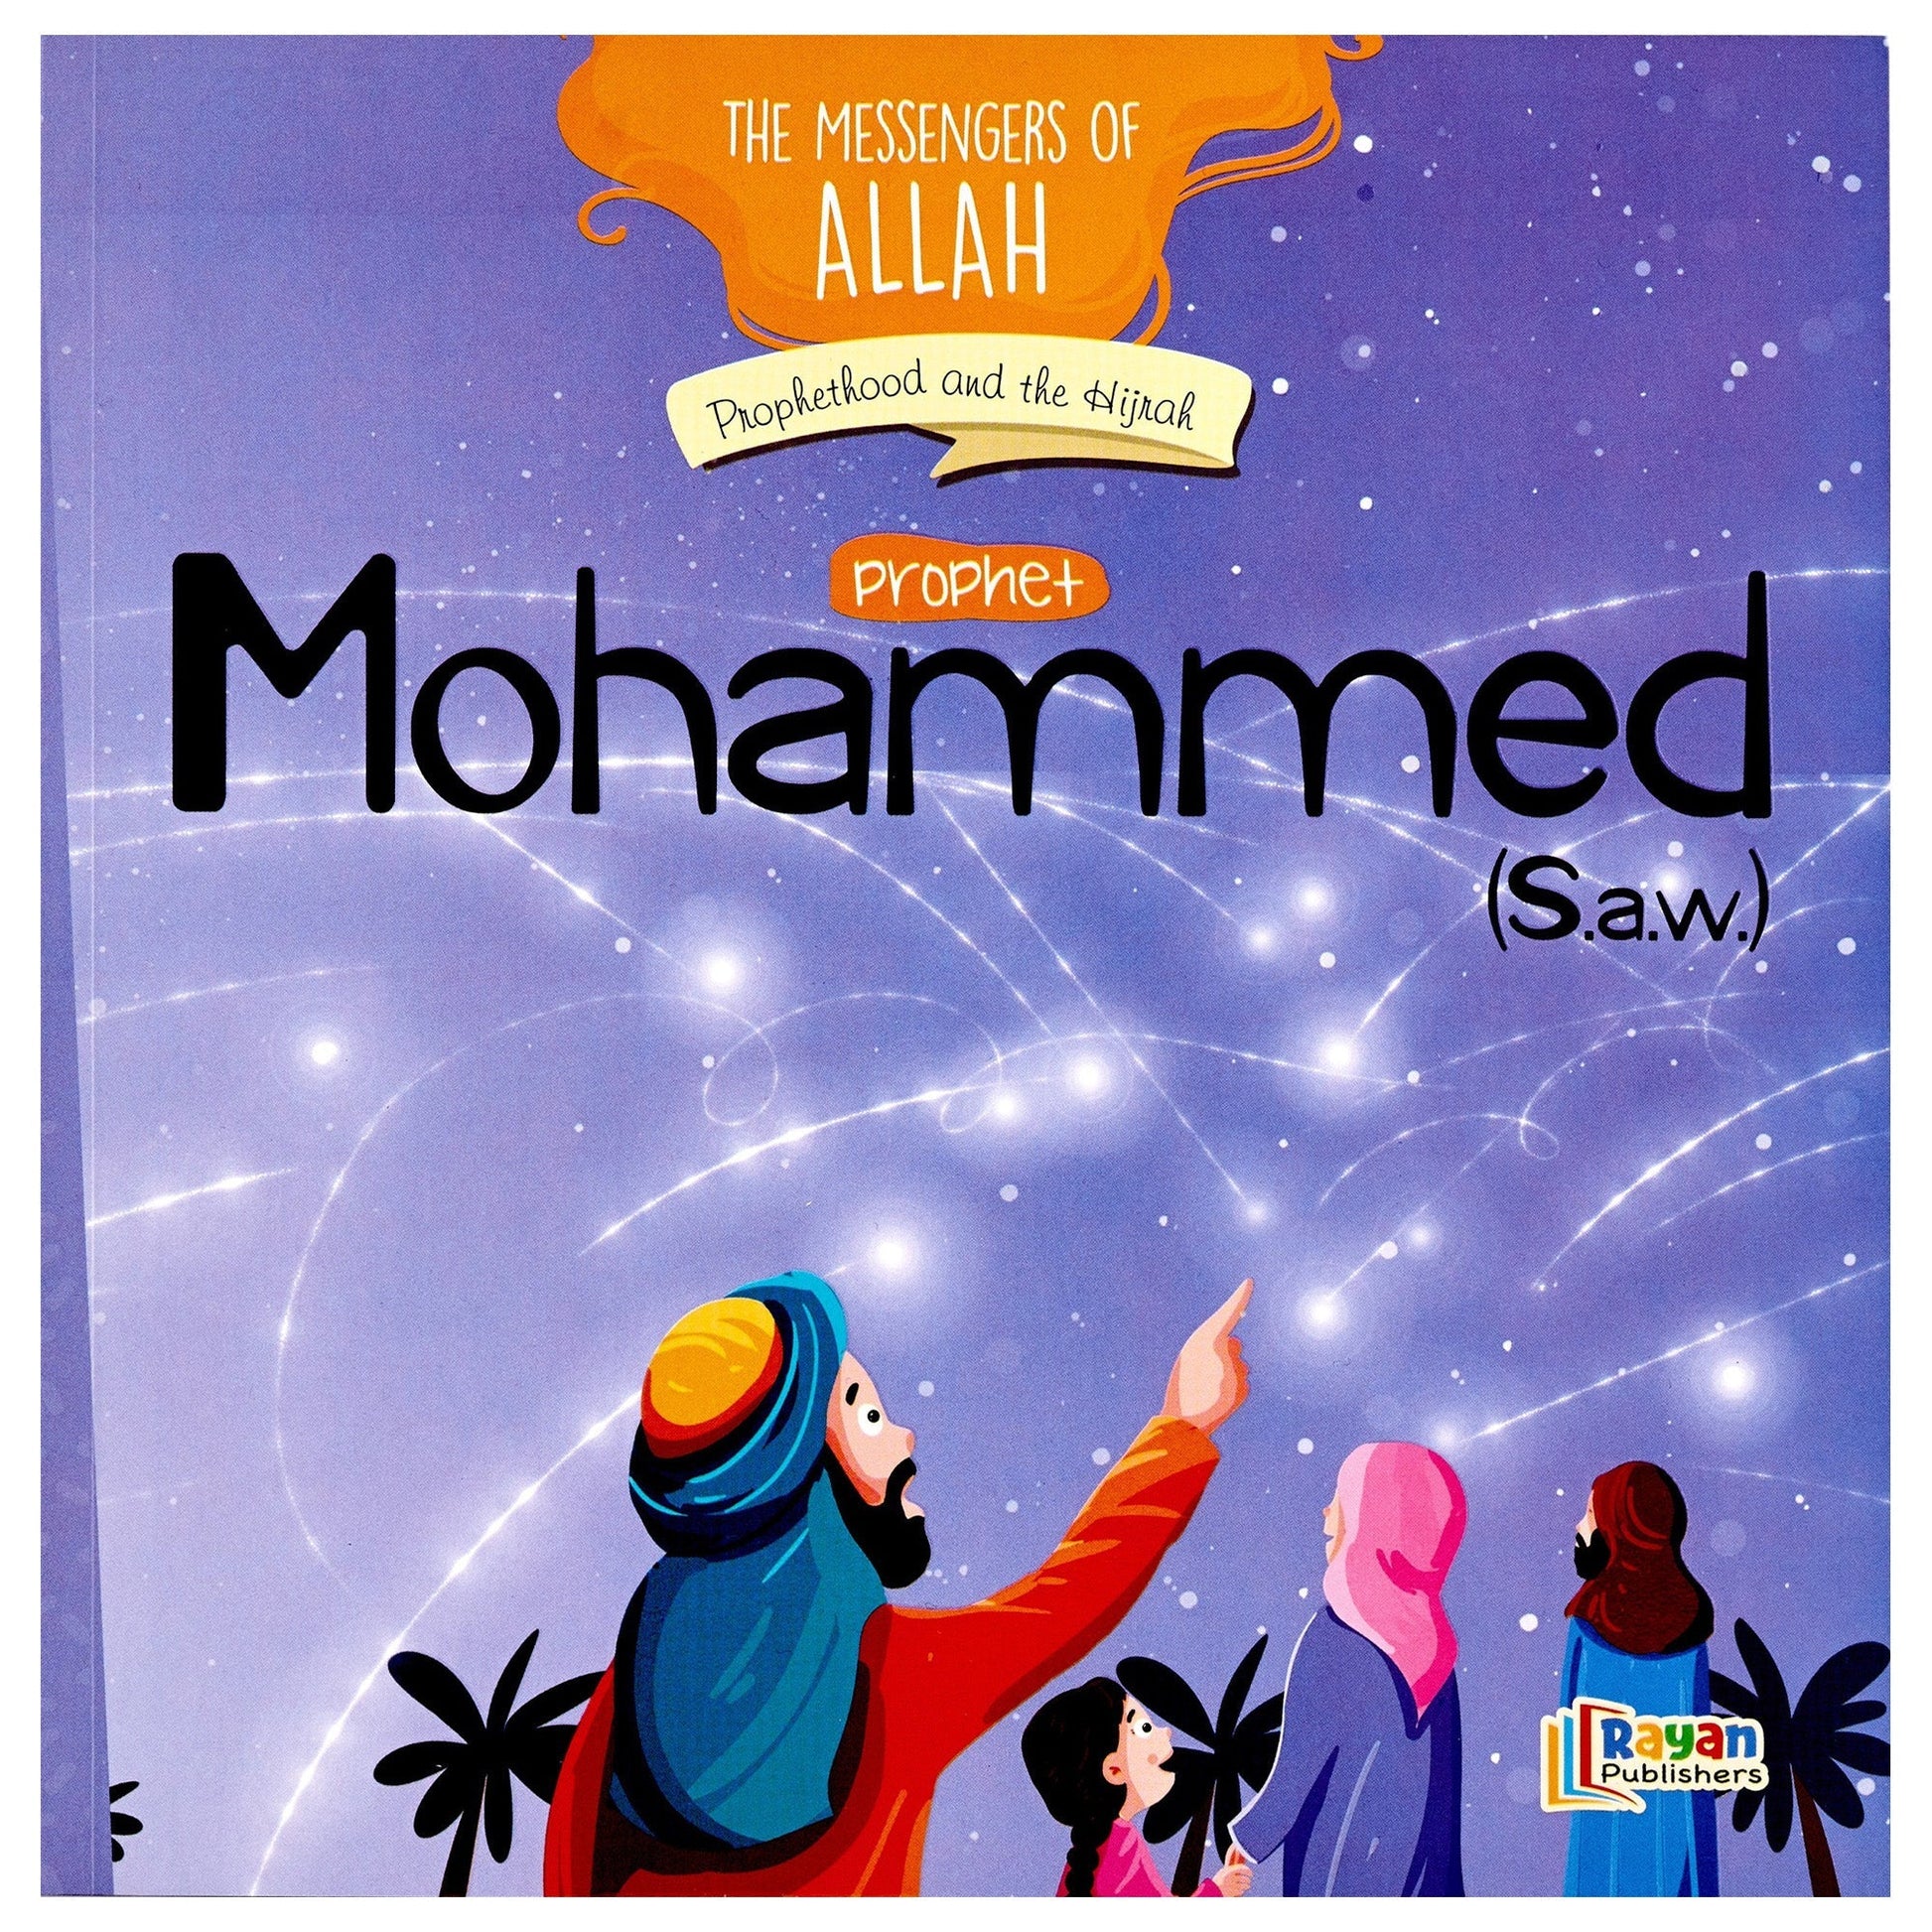 The Messengers of Allah - Prophet Mohammed (s.a.w.) 2 Books Set for Children (Stories, Activities, Glossary, Q&A)-almanaar Islamic Store